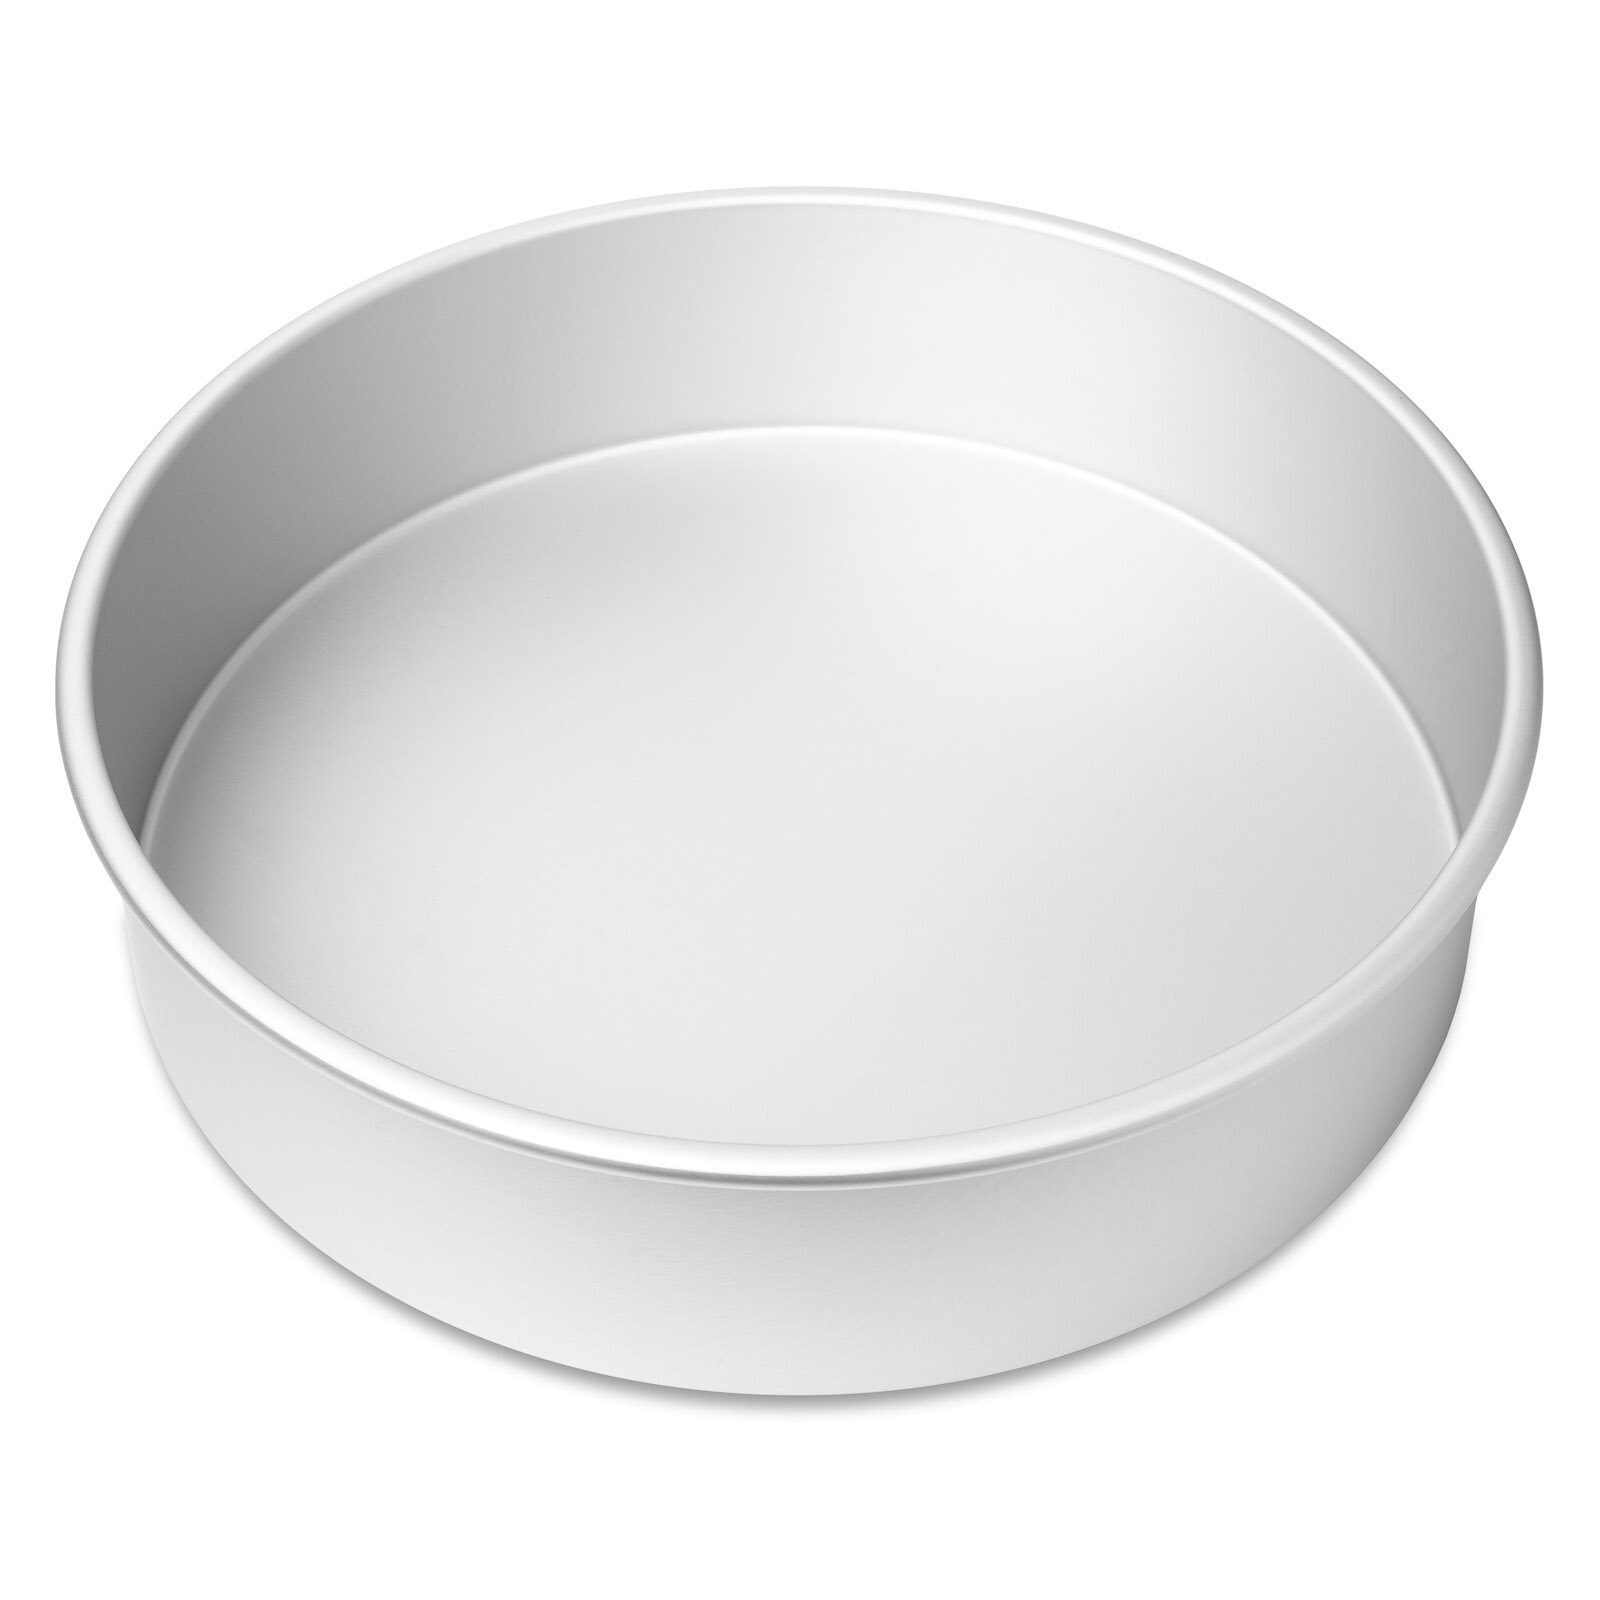 https://ak1.ostkcdn.com/images/products/is/images/direct/2d51f9c956234a77214d69aa6e57a34eecc577fe/Round-Aluminum-Cake-Pans---Last-Confection.jpg